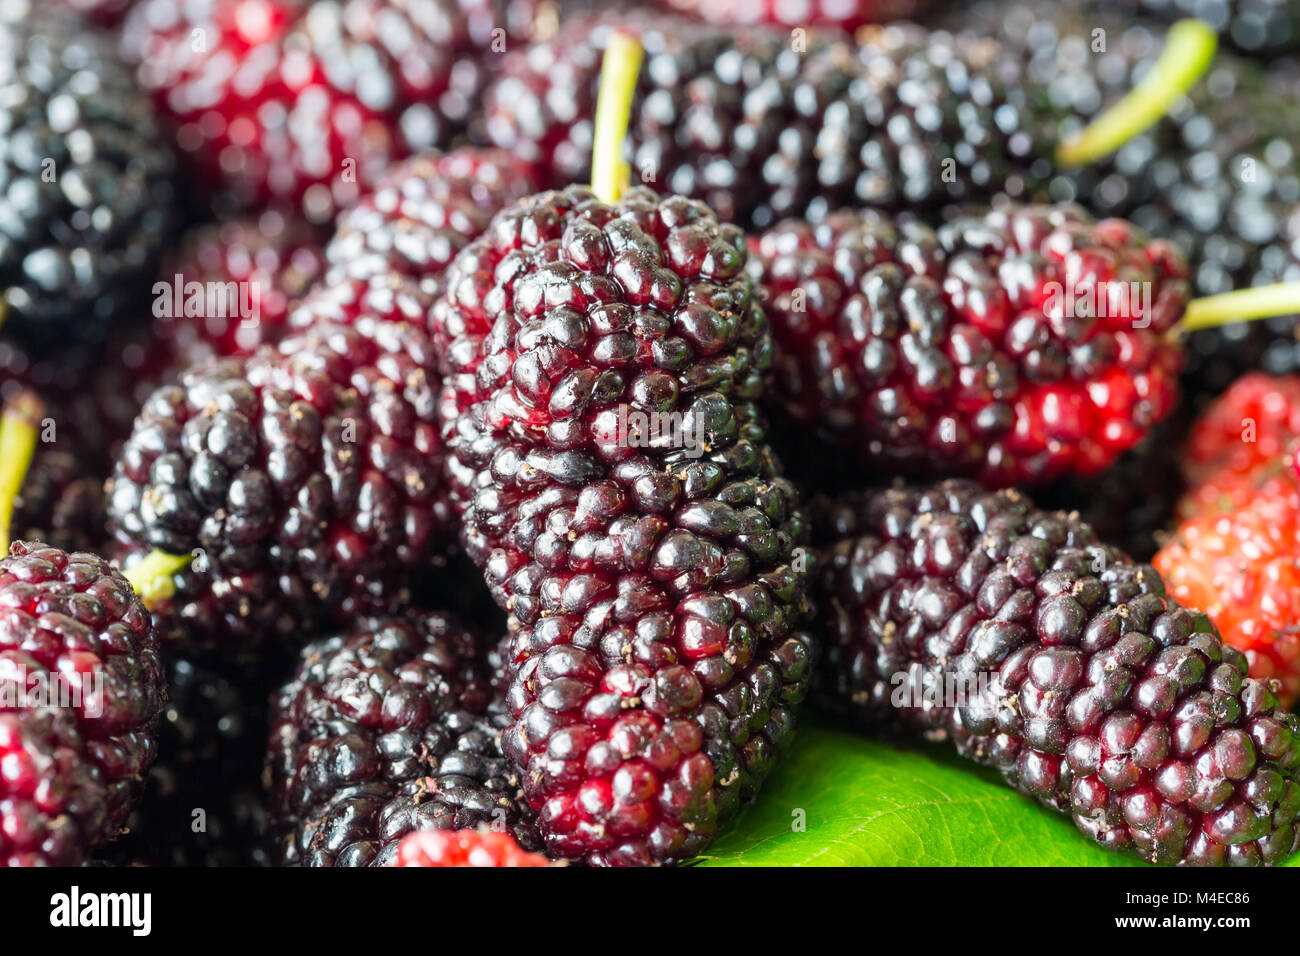 Frisches Obst Maulbeere Stockfoto